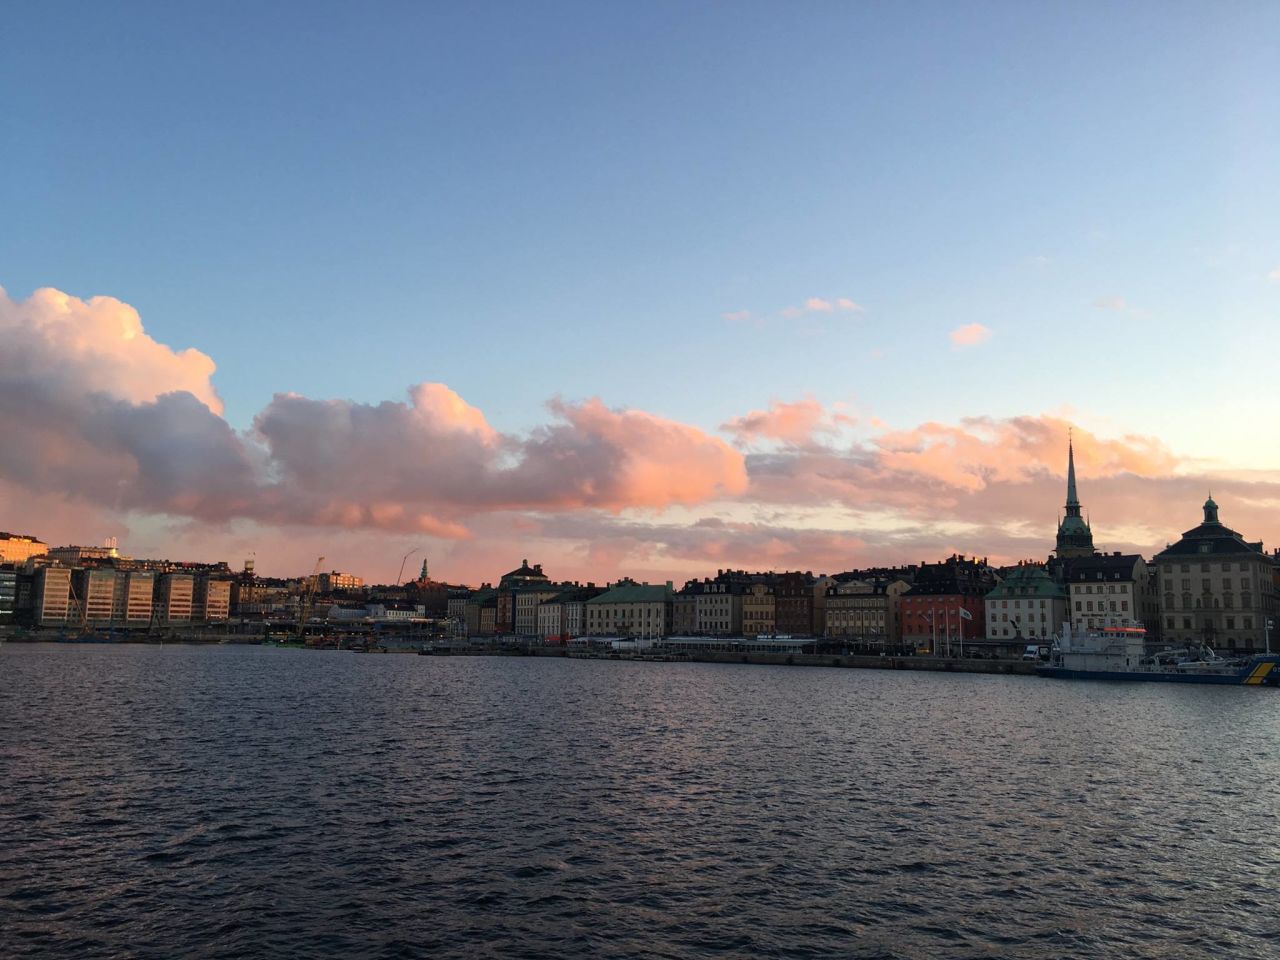 The sunset view of Stockholm from af Chapman can't be rivalled.